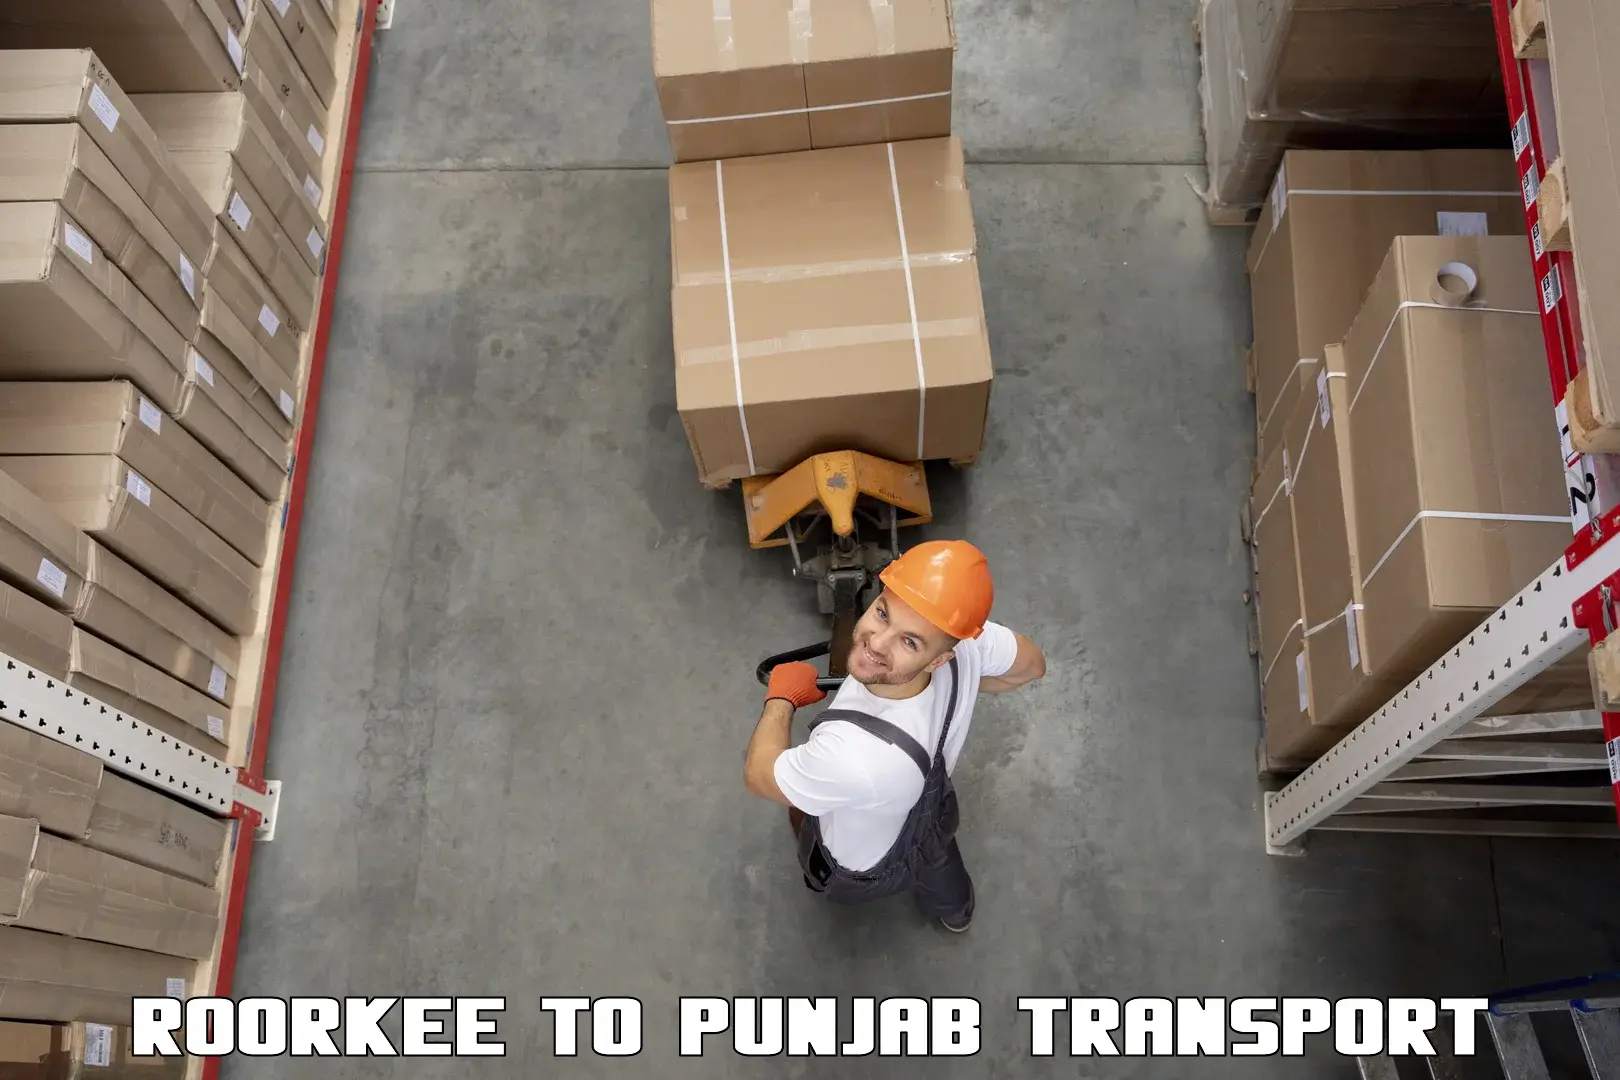 Commercial transport service Roorkee to Barnala